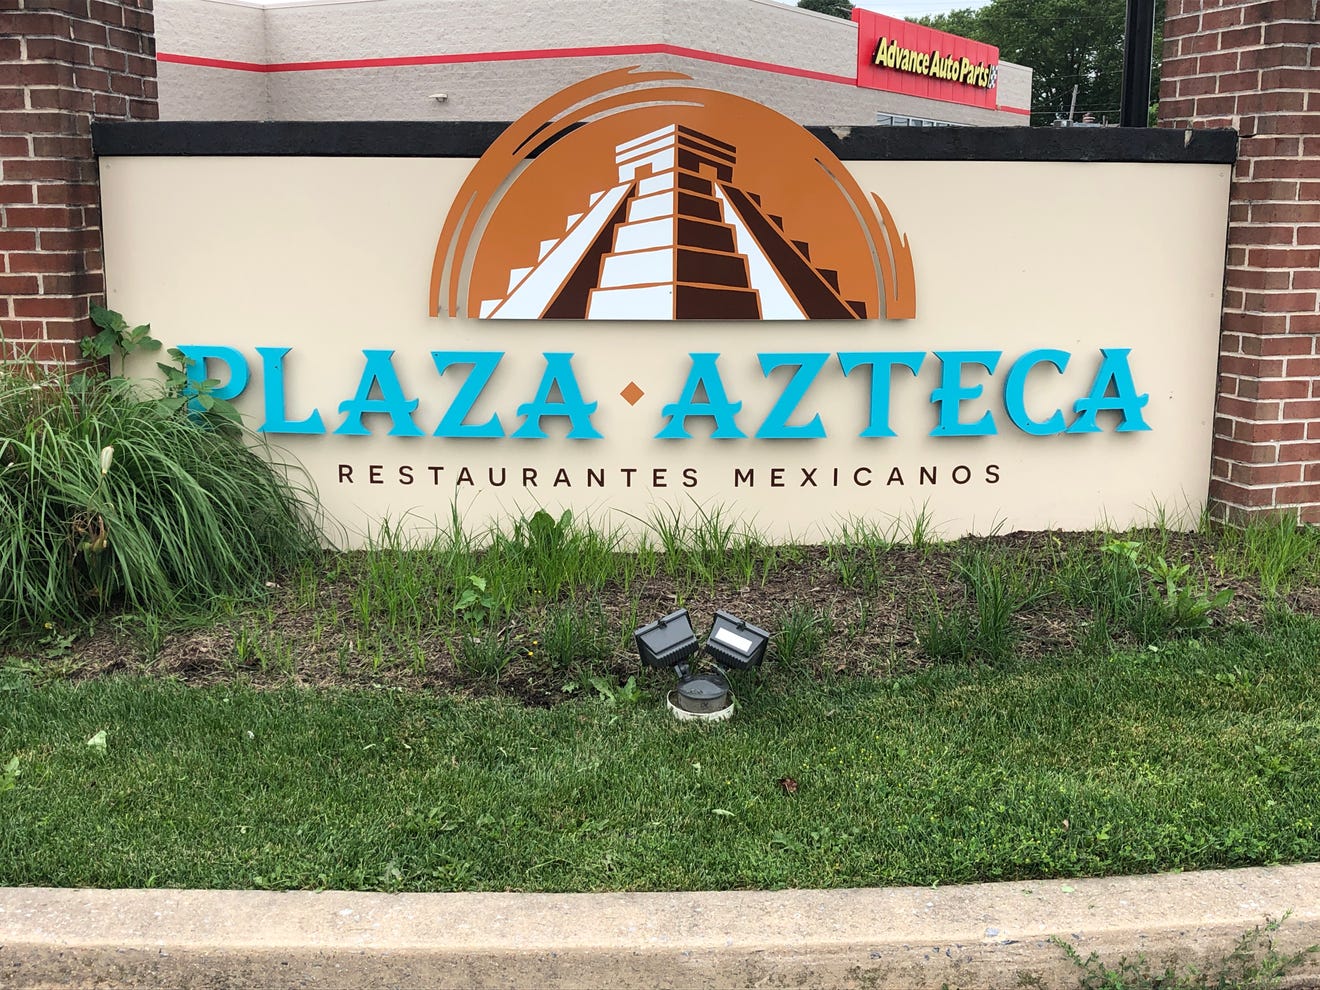 New Mexican restaurant Plaza Azteca to open Sioux Falls location